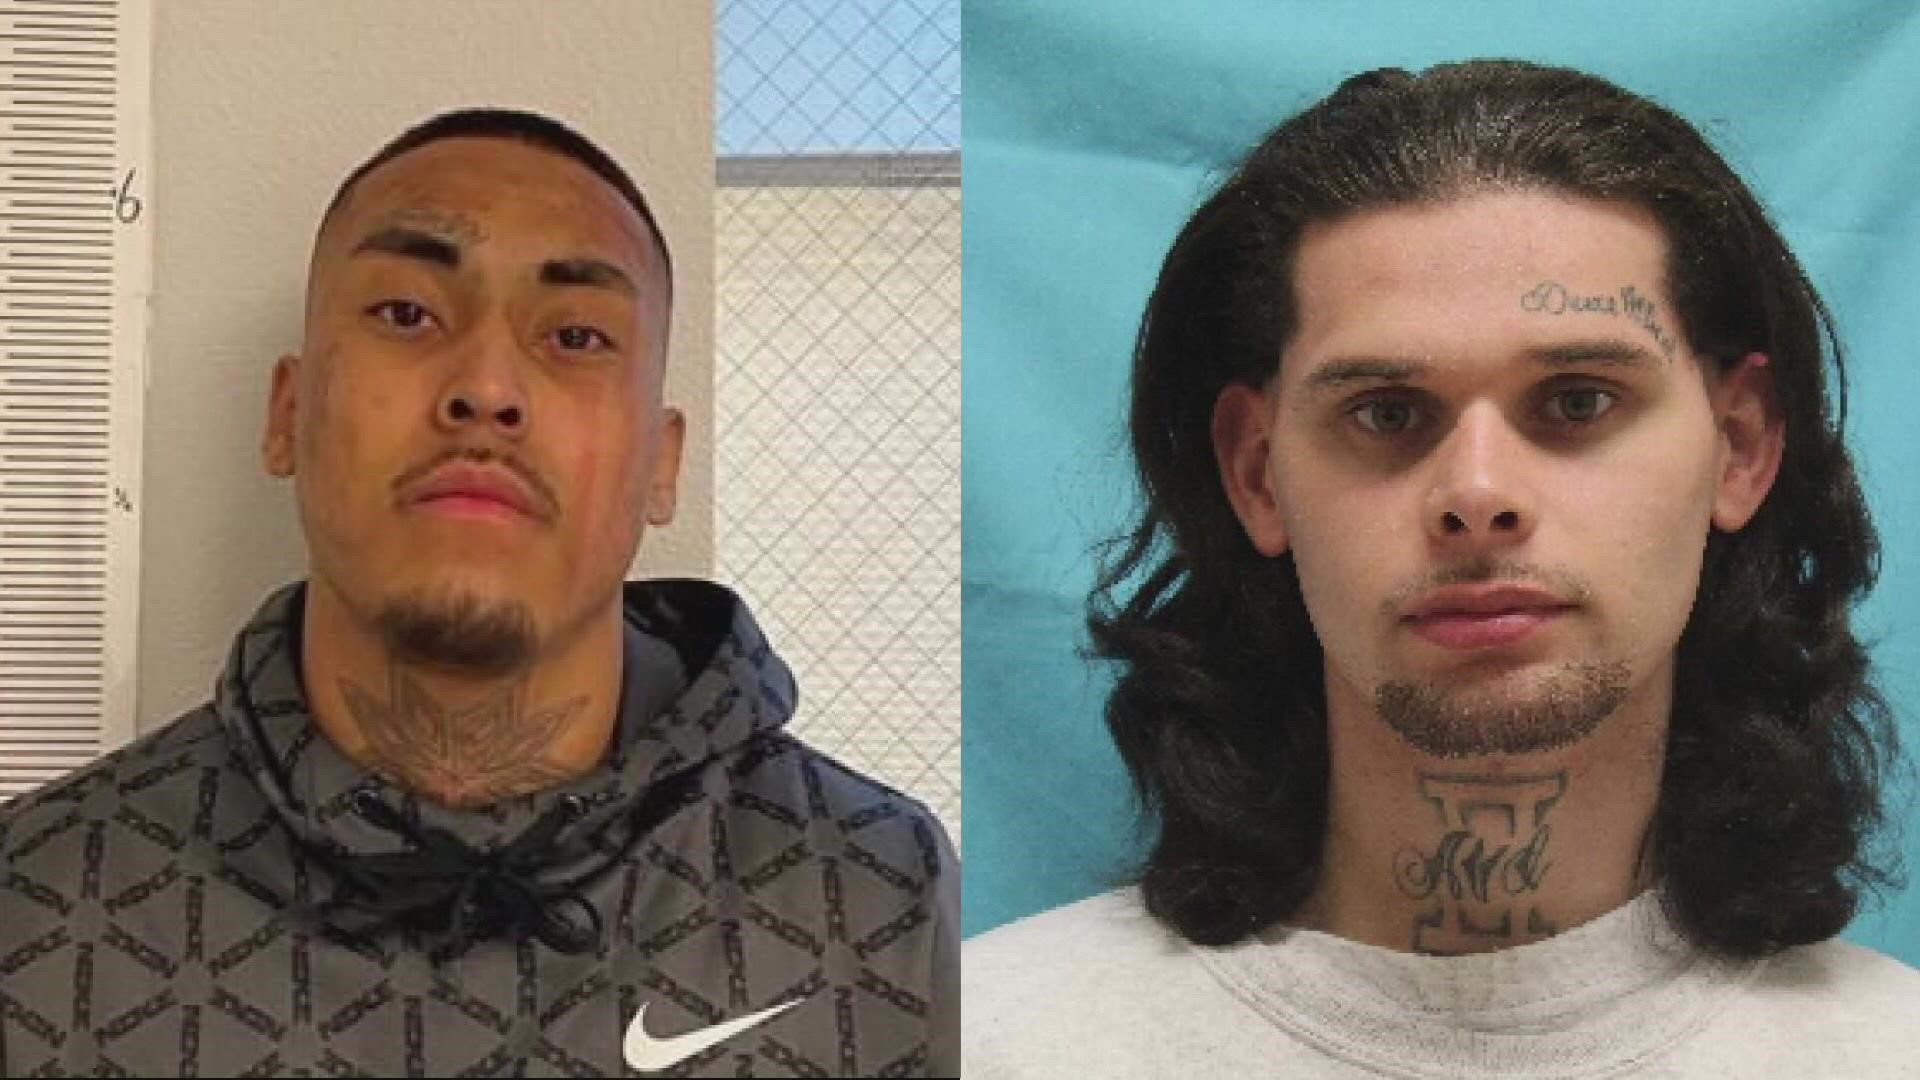 New court documents say Issac Ott and Ray Wynecoop recorded themselves shooting at and eluding police officers on June 26.